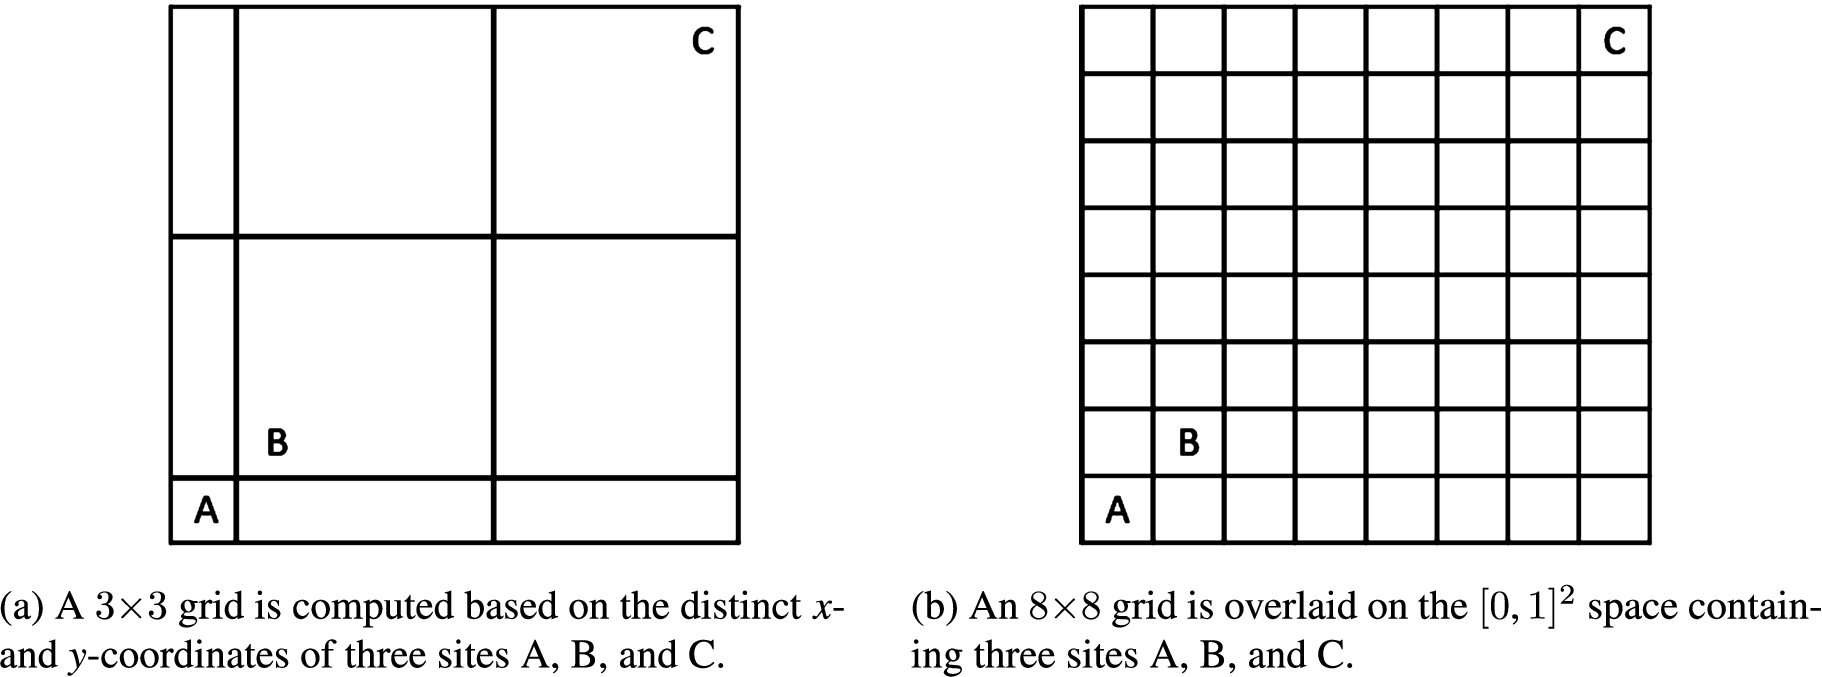 Two different approaches for computing a grid based on a playable space defined by three sites A, B, and C, each with distinct x- and y-coordinates. The approach we use is depicted in (a). This approach results in smaller, more dense tensors, but information of the relative distances between all sites is not necessarily preserved. The alternative approach, depicted in (b), preserves more of this information, but can result in large and sparse tensors.